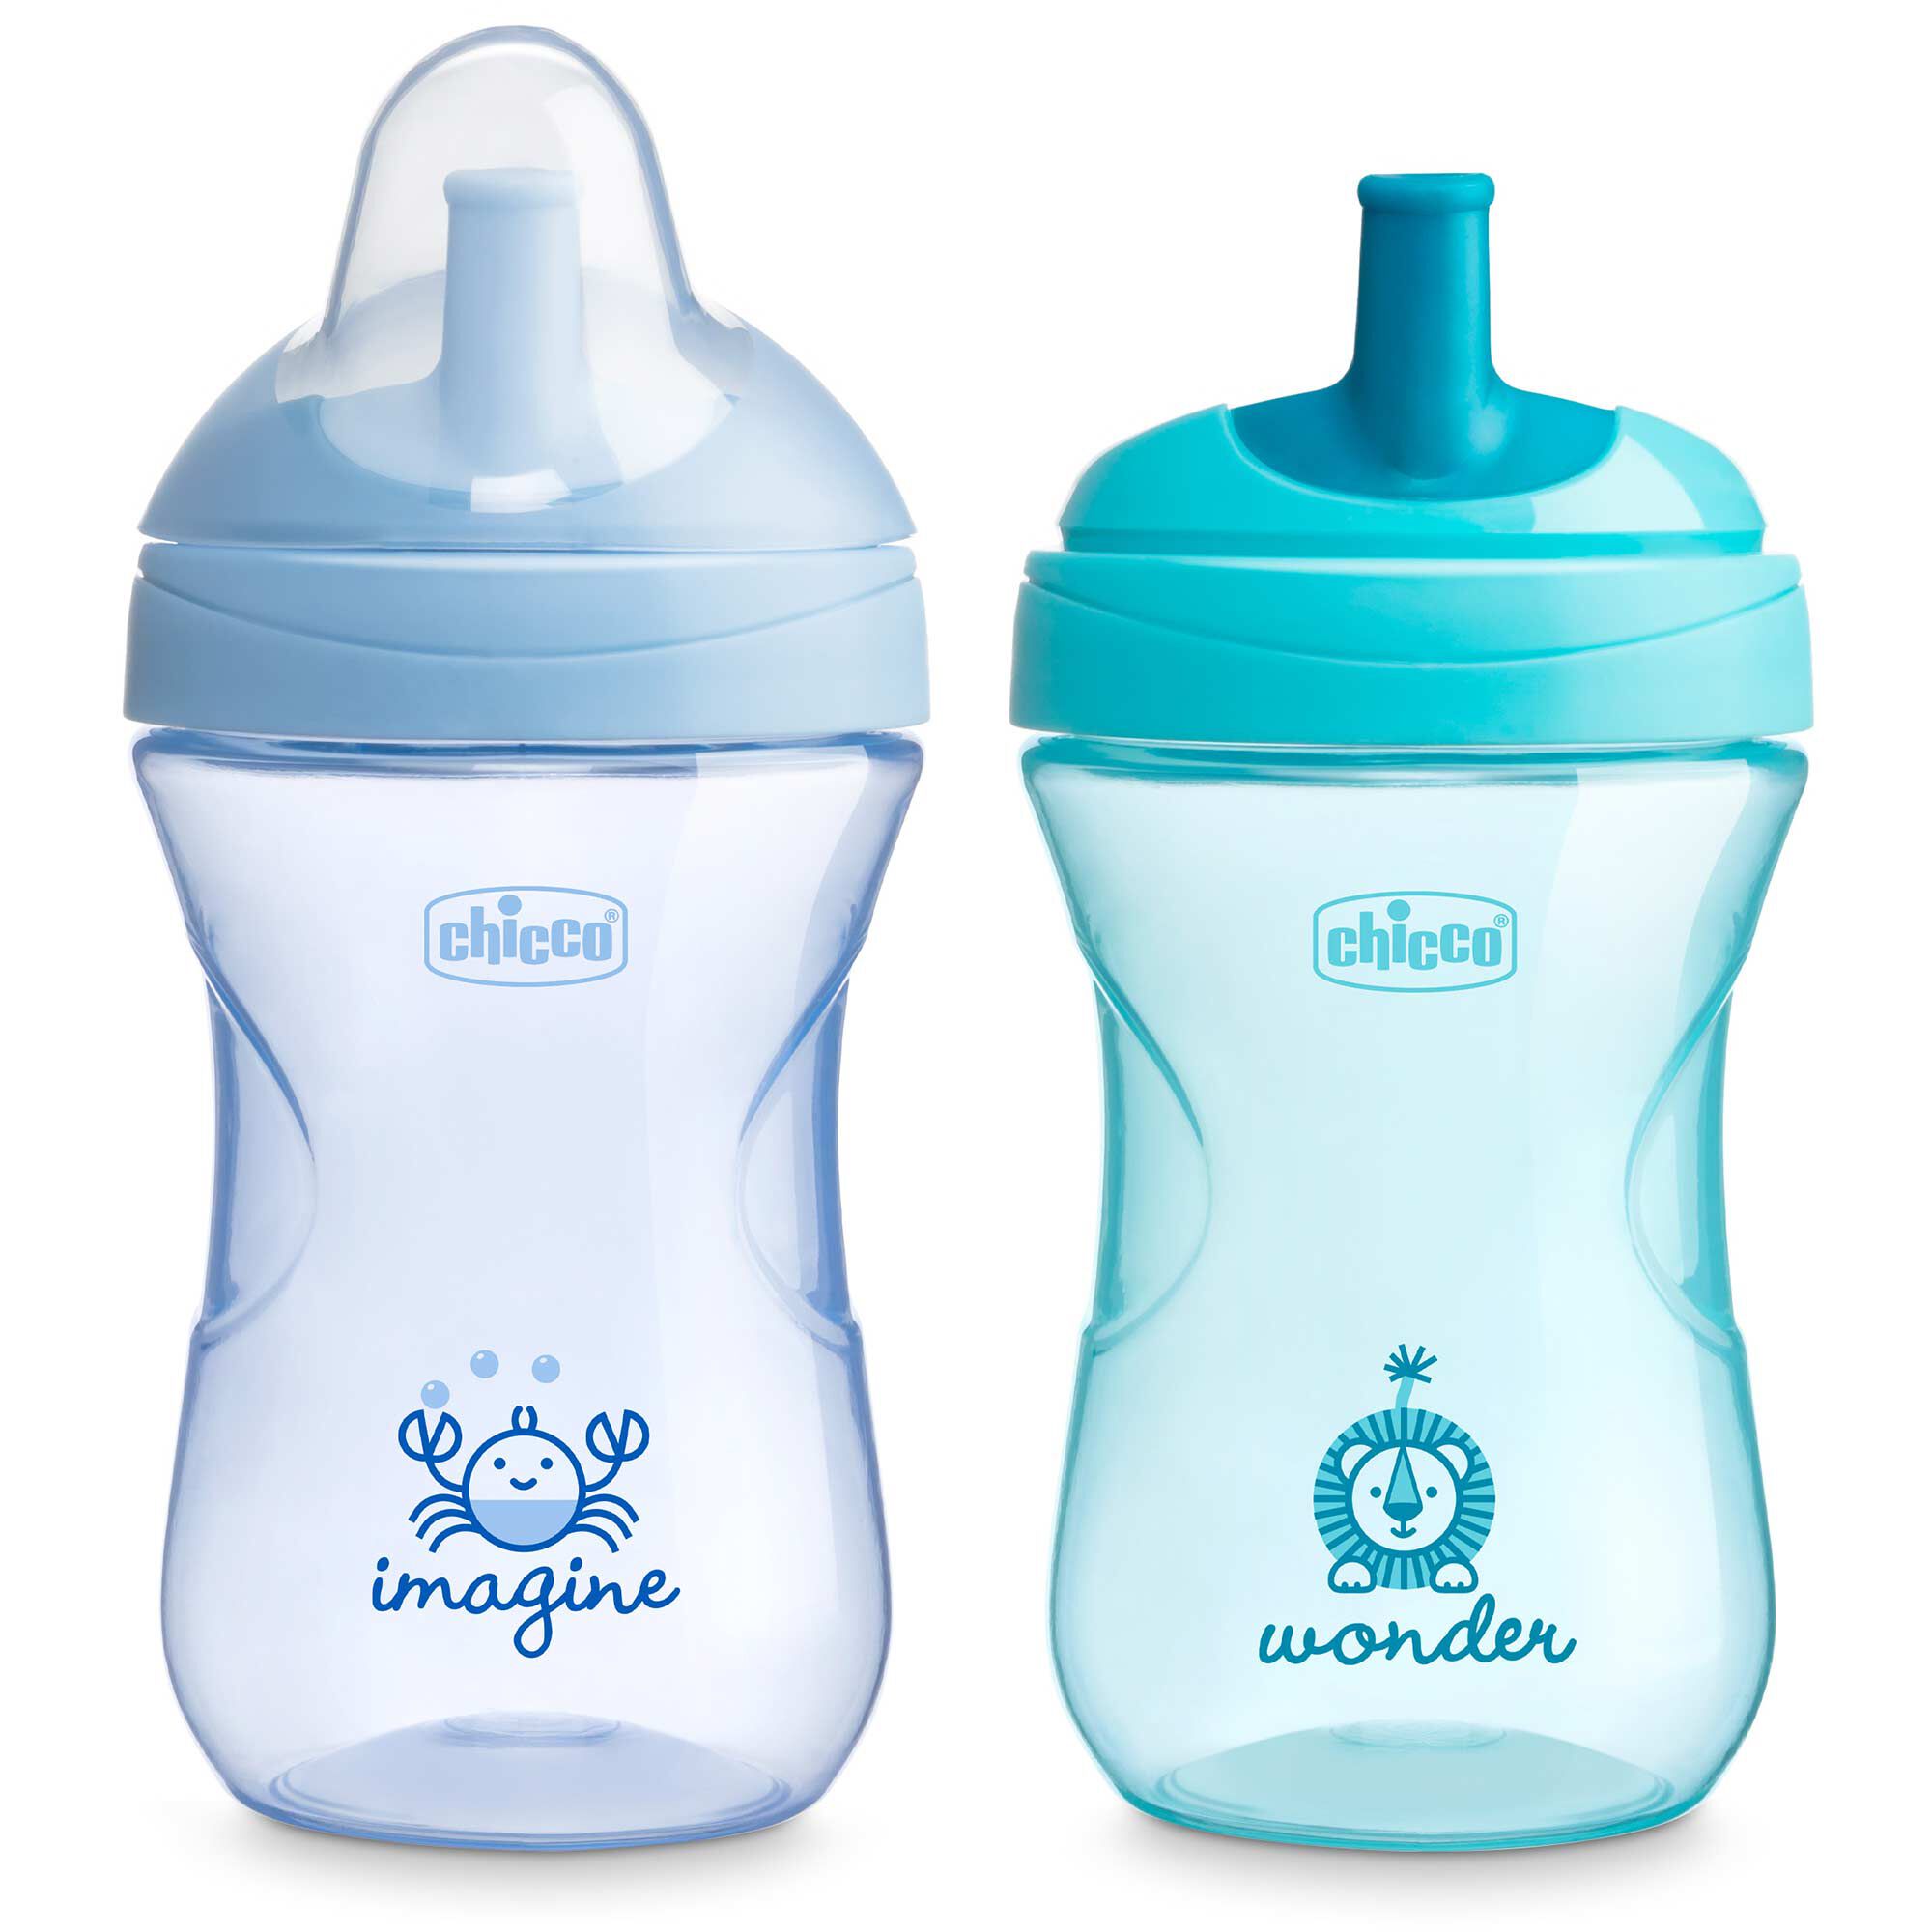 https://www.chiccousa.com/dw/image/v2/AAMT_PRD/on/demandware.static/-/Sites-chicco_catalog/default/dw8562c827/images/products/feeding/first-straw/chicco-sport-spout-trainer-sippy-cup-9oz-9m-2pk-pale-blue-teal.jpg?sw=2000&sh=2000&sm=fit